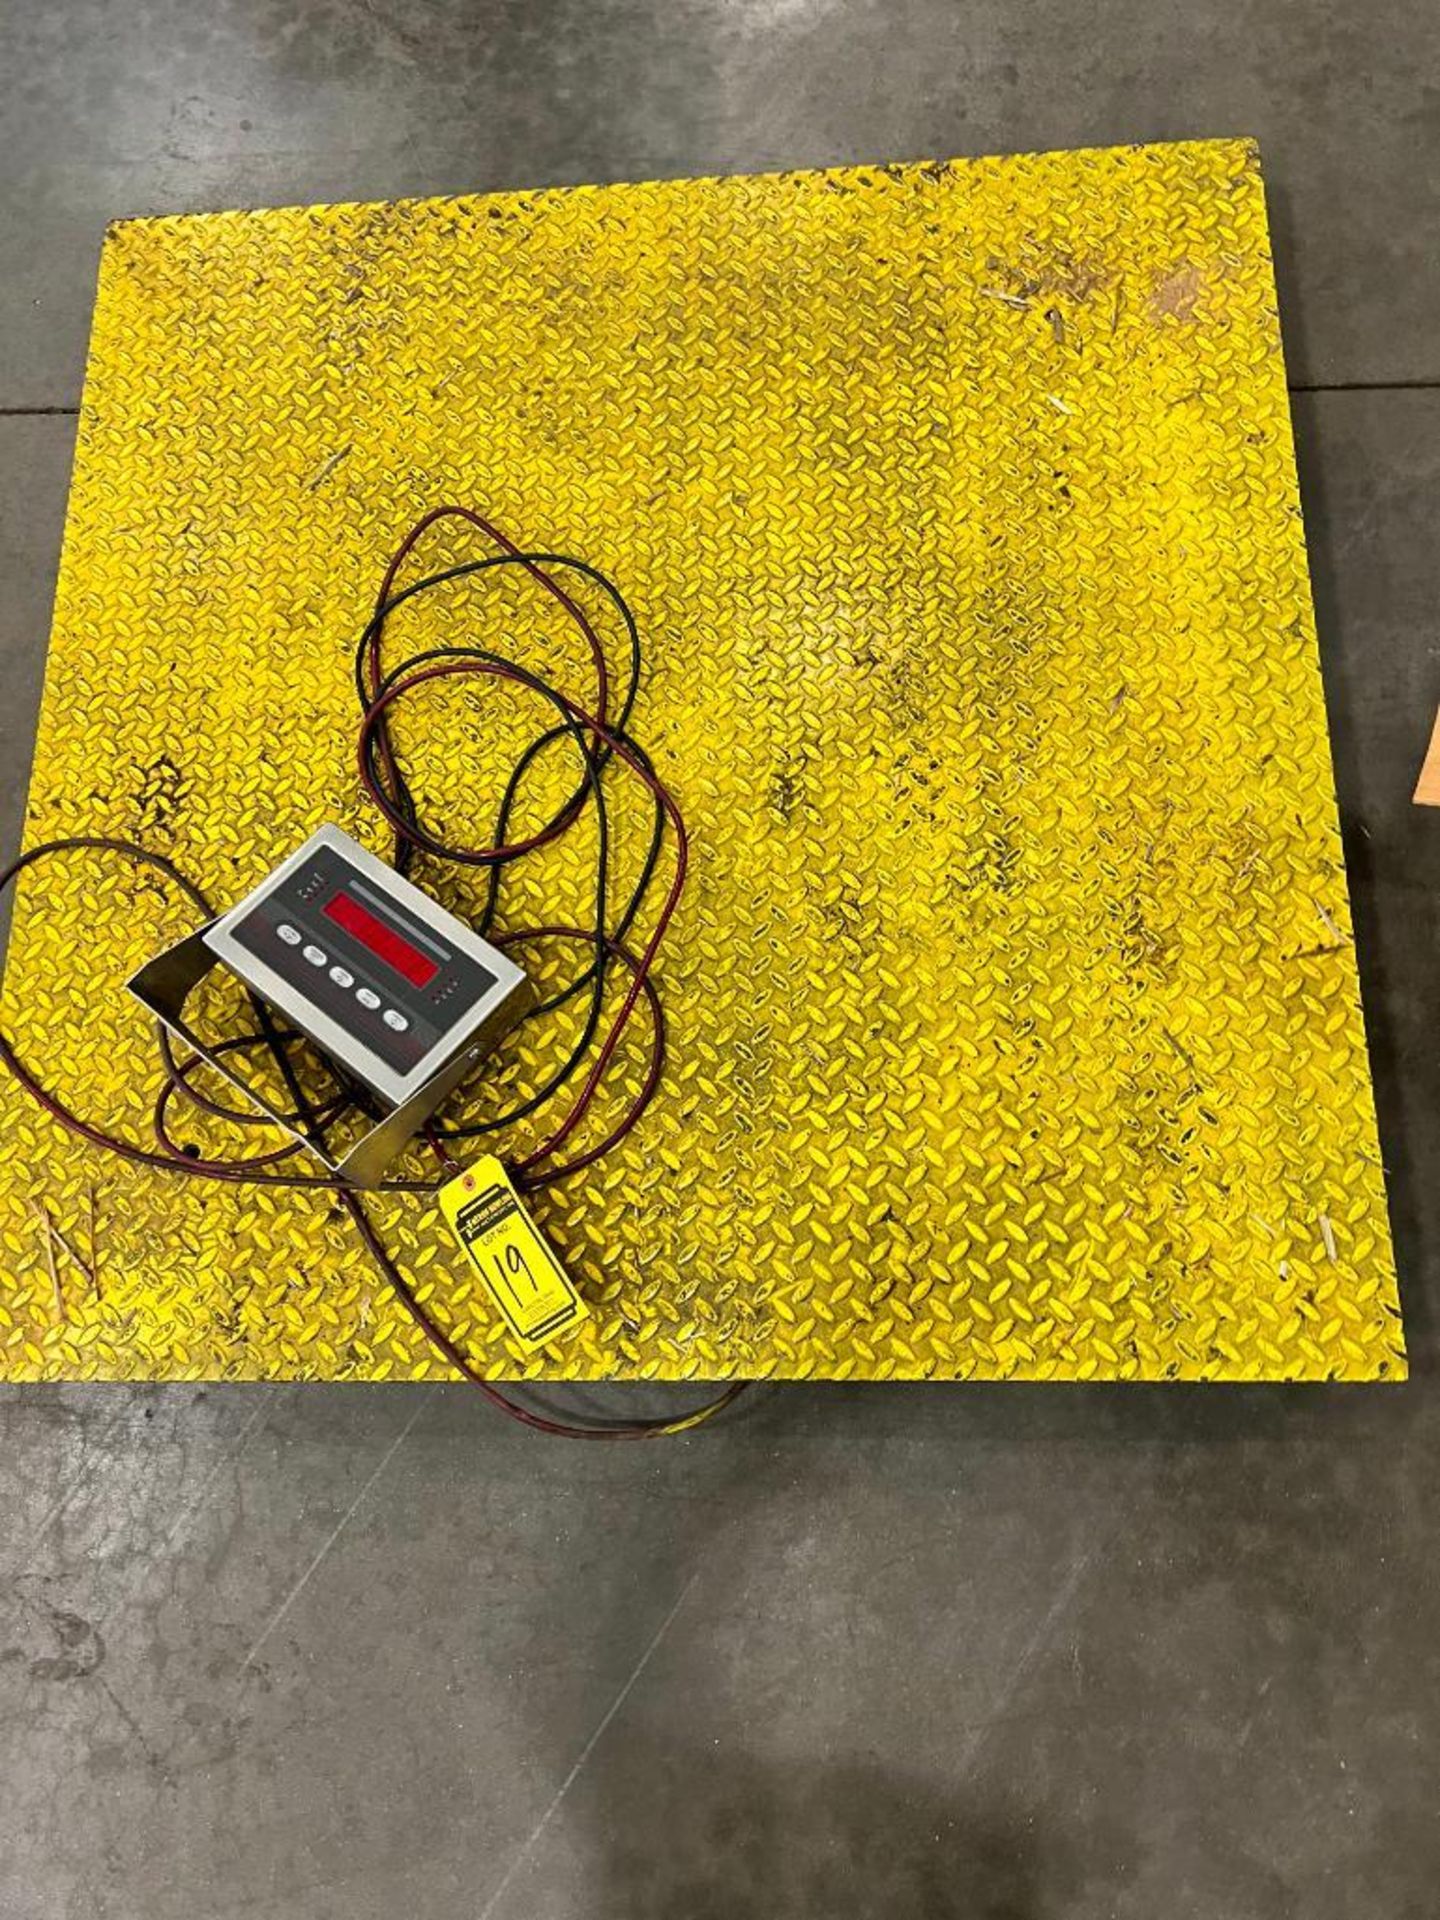 Floor Scale w/ Rice Lake Weighing Digital Readout ($15 Loading fee will be added to buyers invoice) - Image 2 of 4